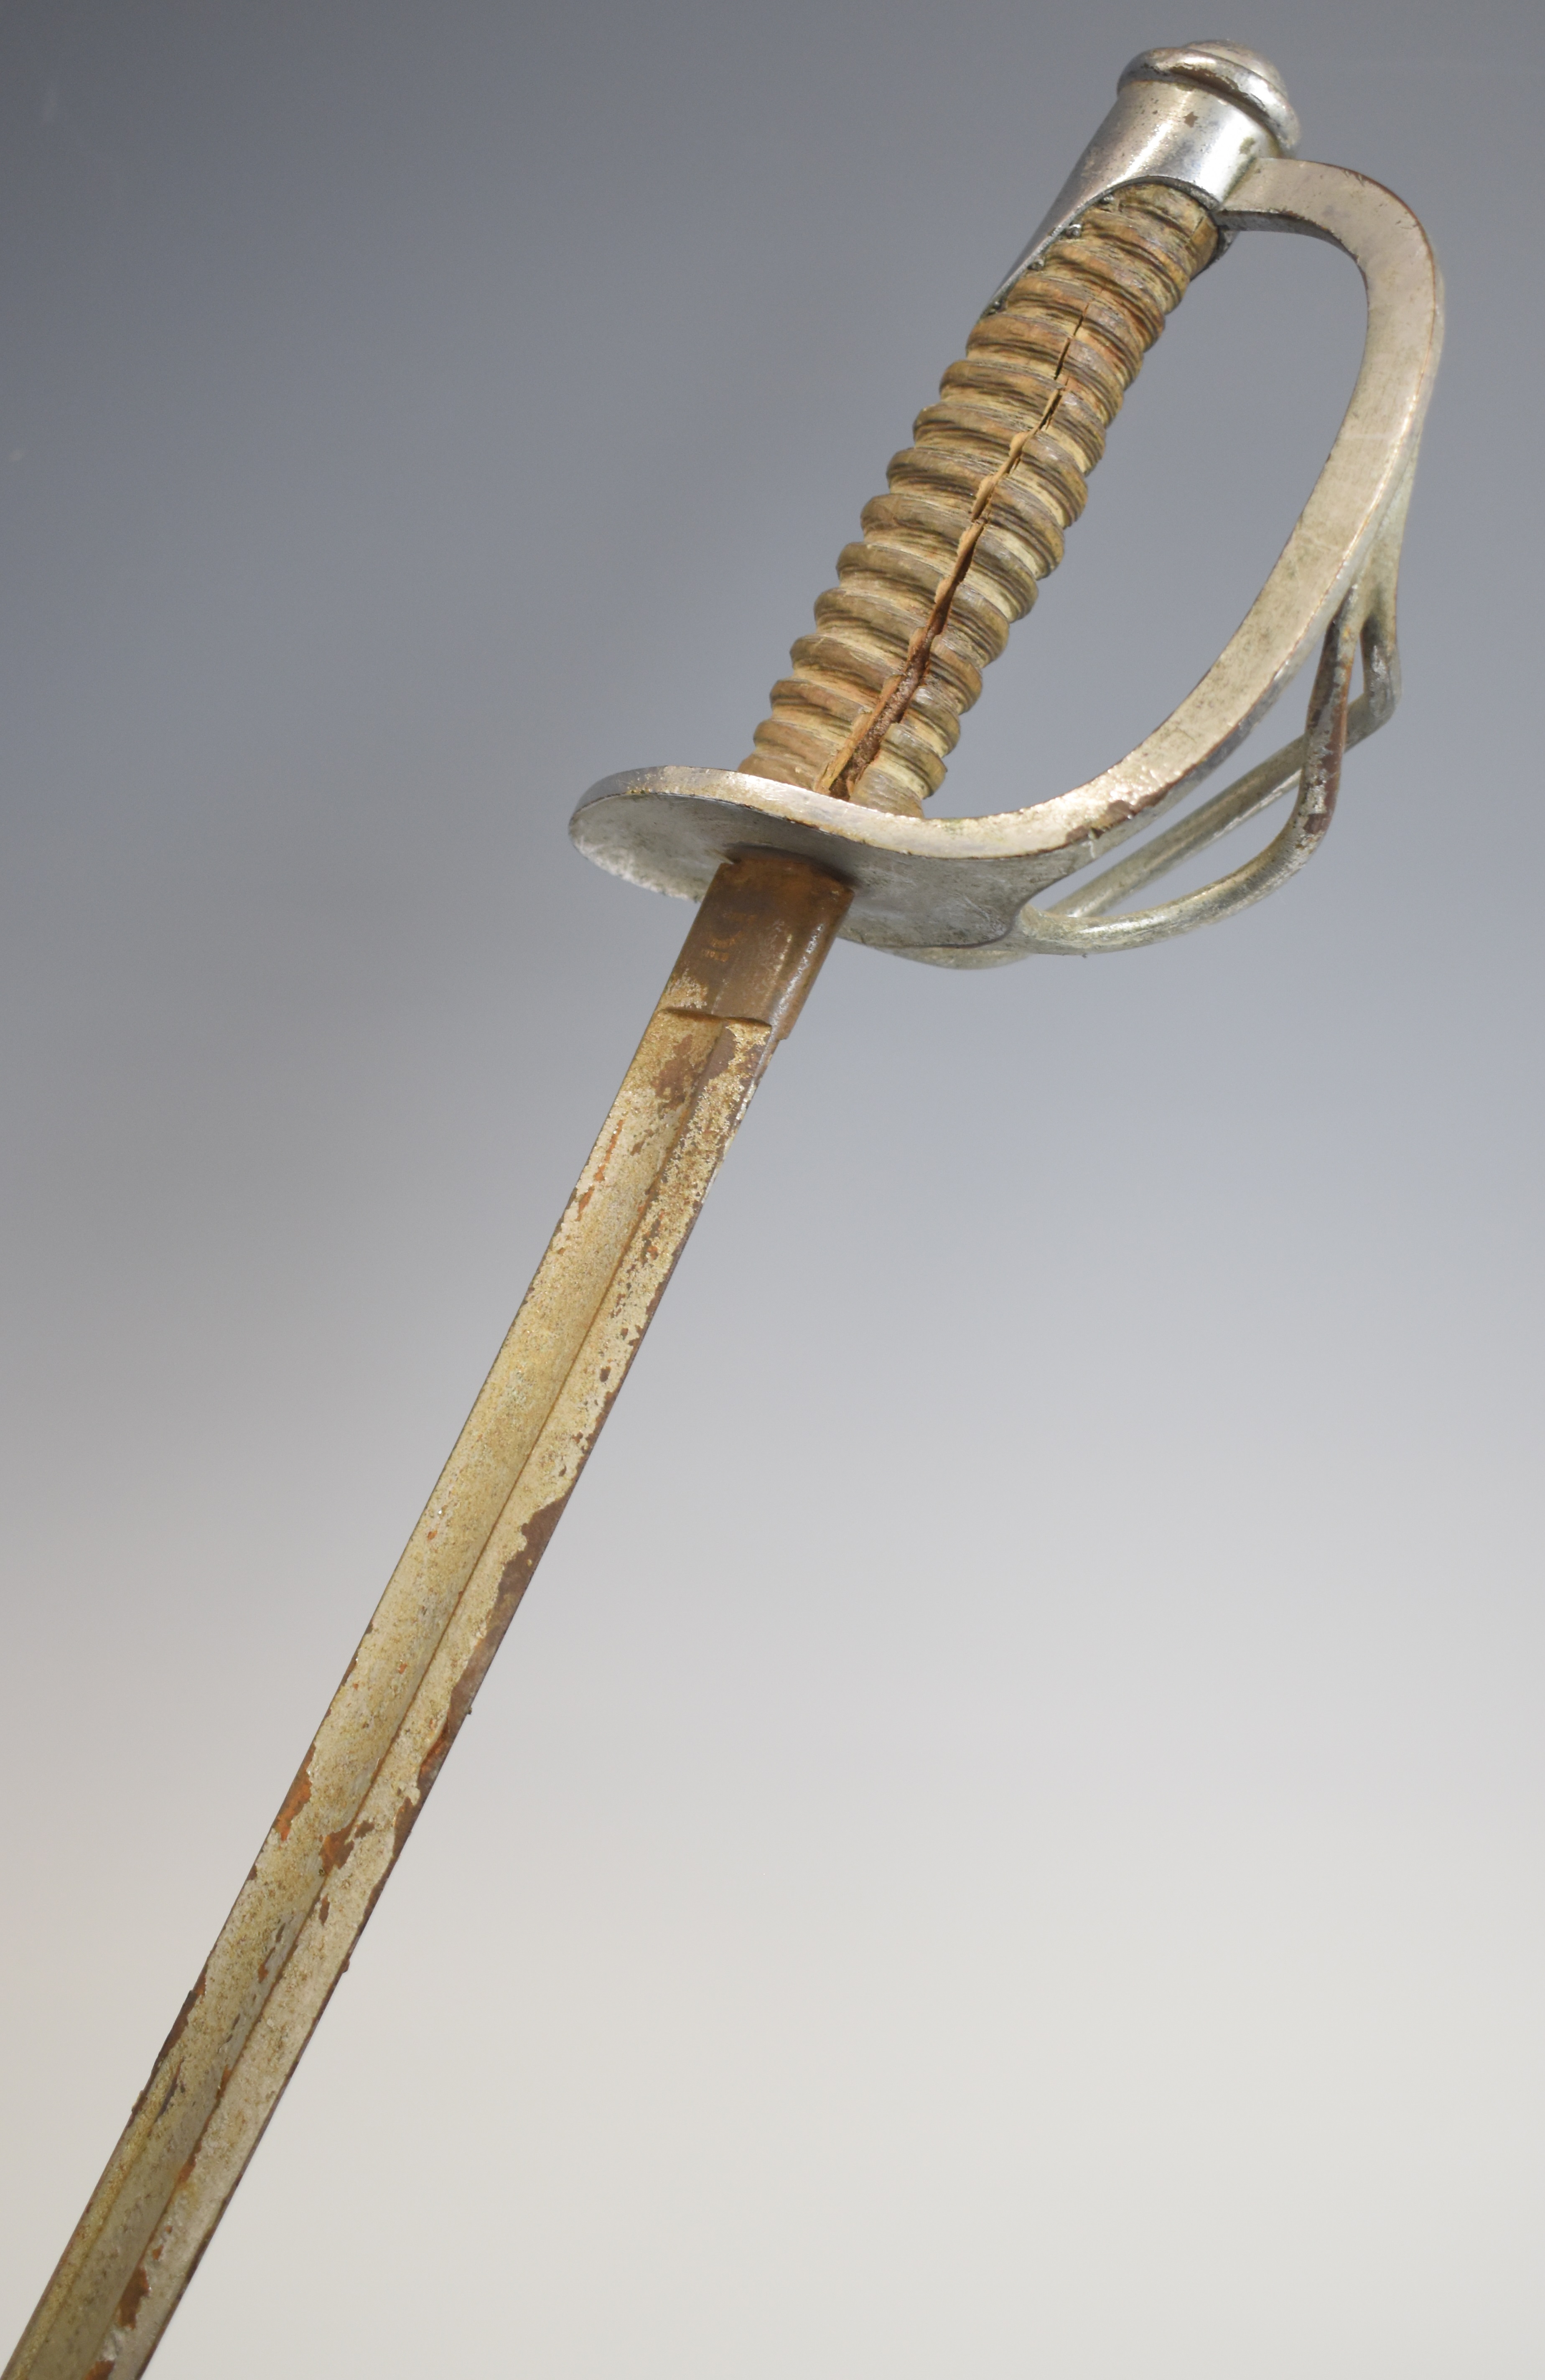 American Civil War sword with wooden grip, two bar hilt, US 1864 AGM to ricasso and Crosby